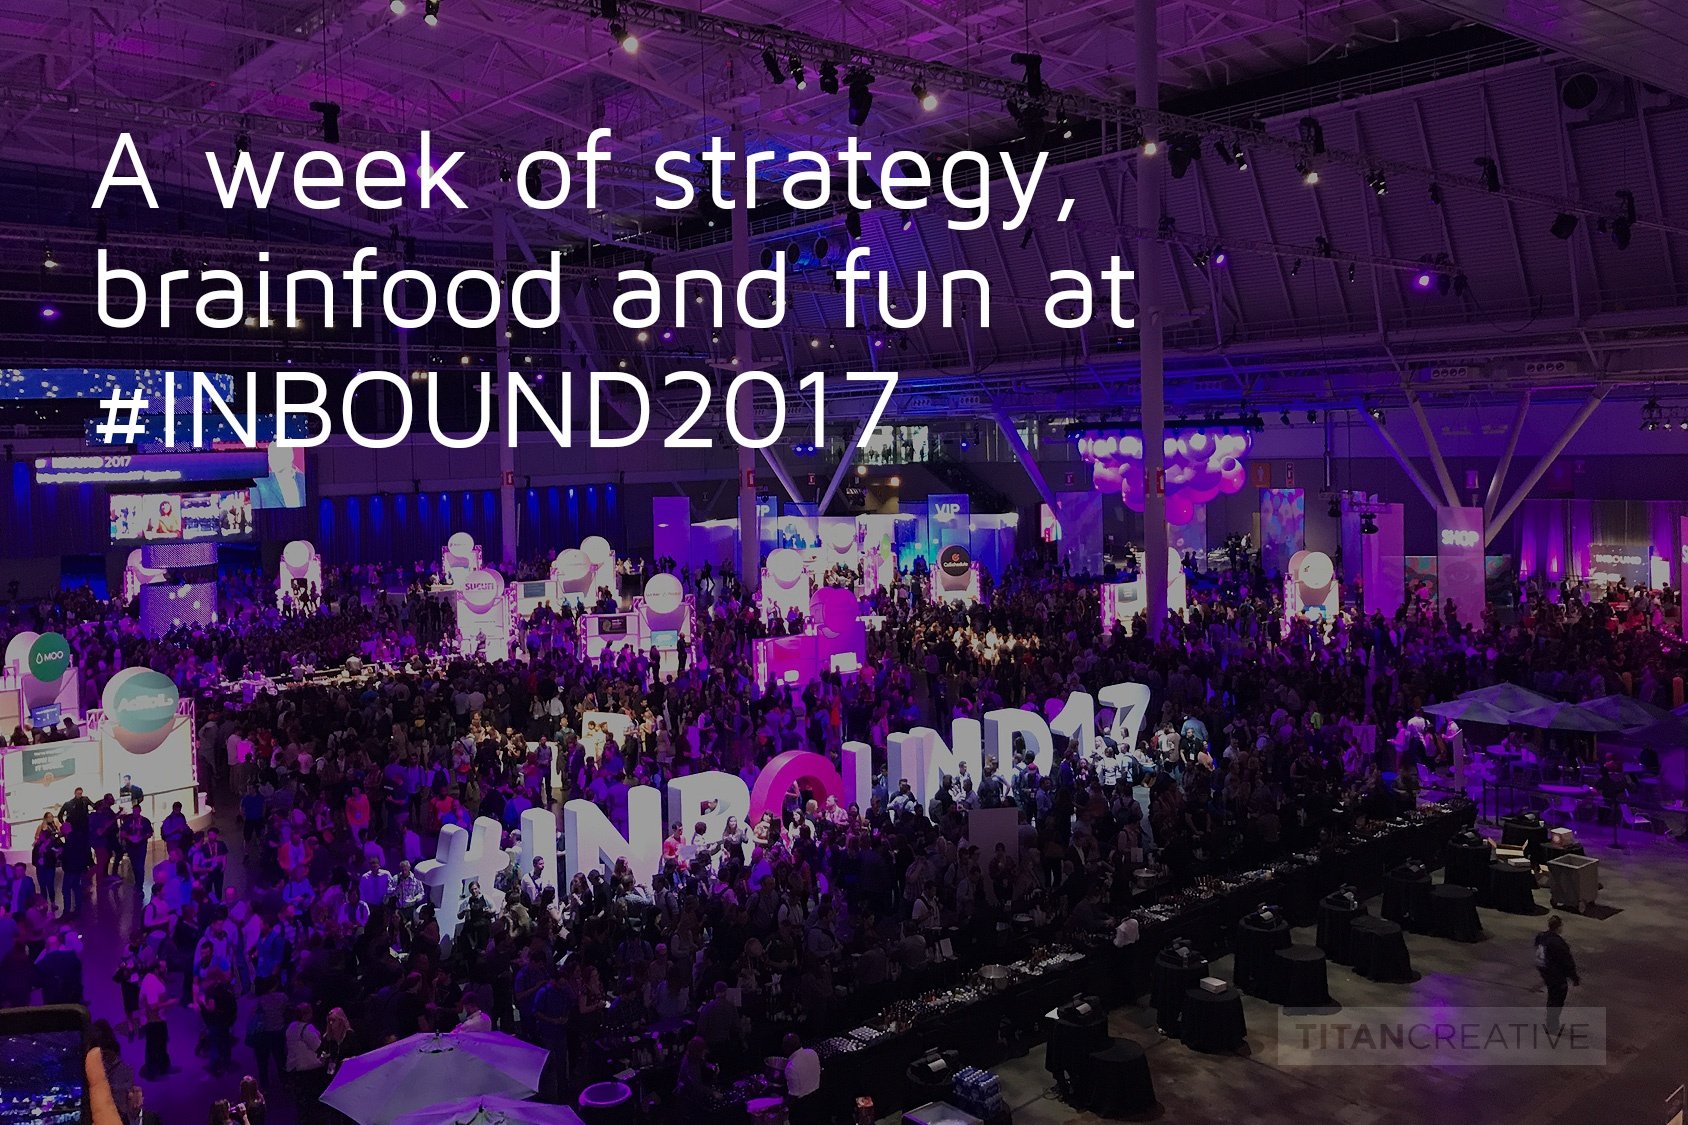 A week of strategy, brainfood and fun at #INBOUND2017